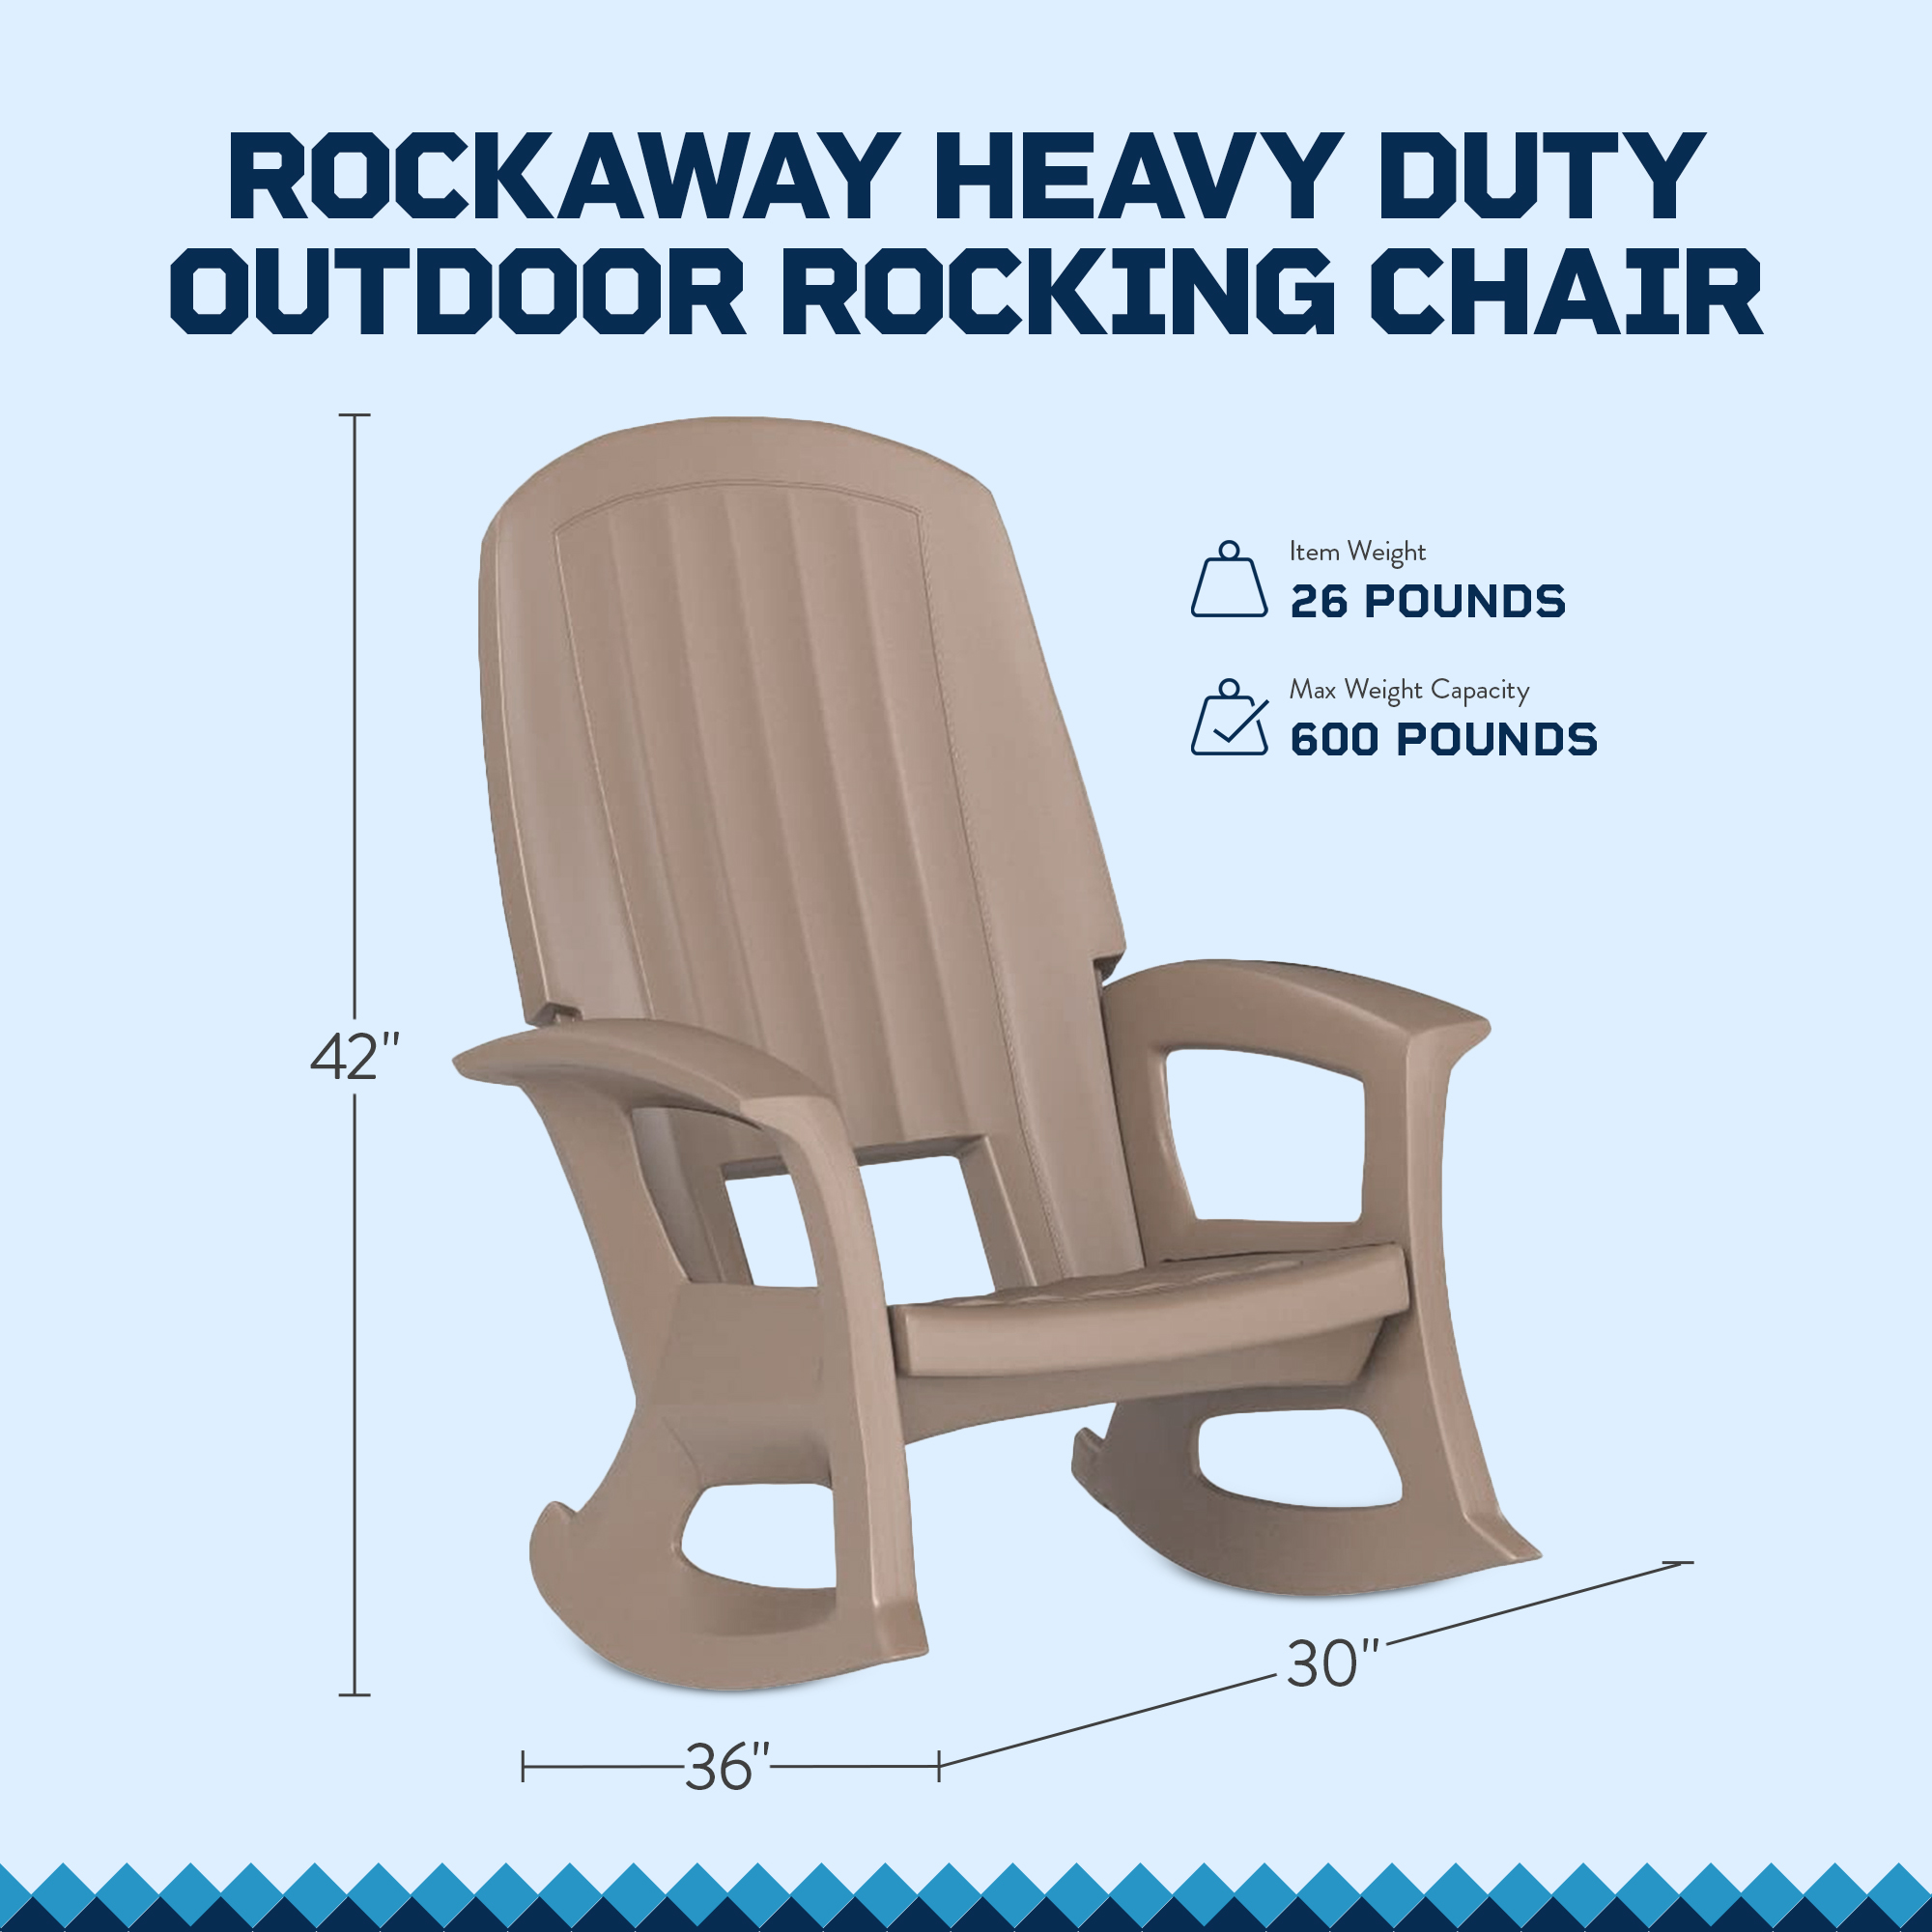 Semco Plastics Rockaway Heavy Duty Resin Outdoor Rocking Chair All-Weather Porch Rocker, Taupe - image 2 of 11